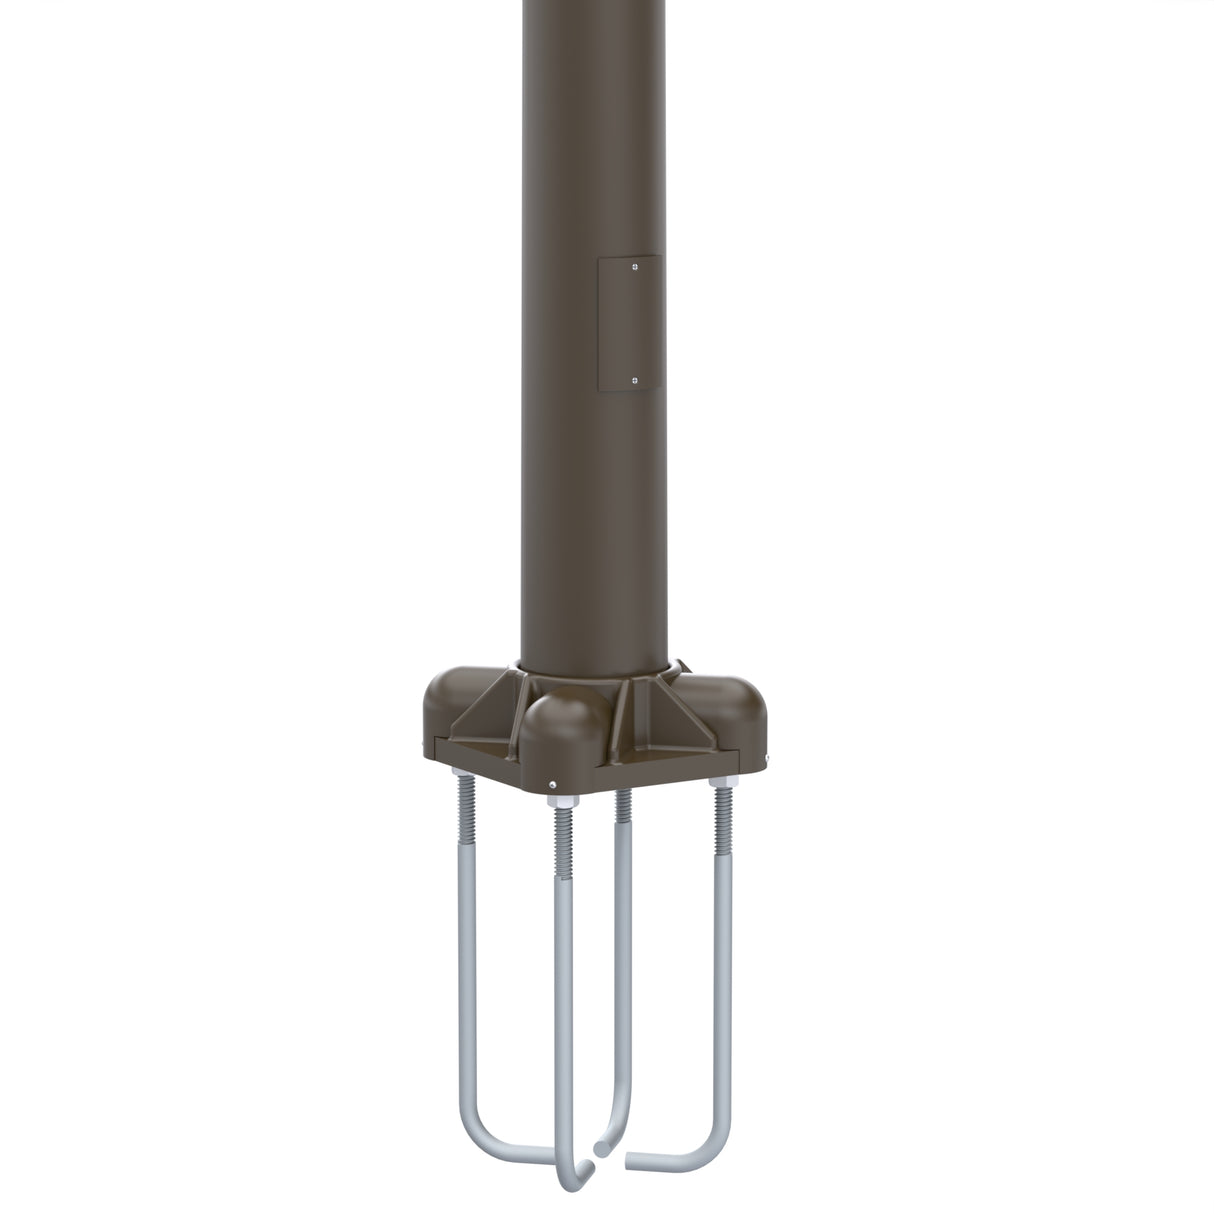 35' Tall x 8.0" Base OD x 4.5" Top OD x 0.188" Thick, Round Tapered Aluminum, Anchor Base Light Pole with 4' Davit Arm